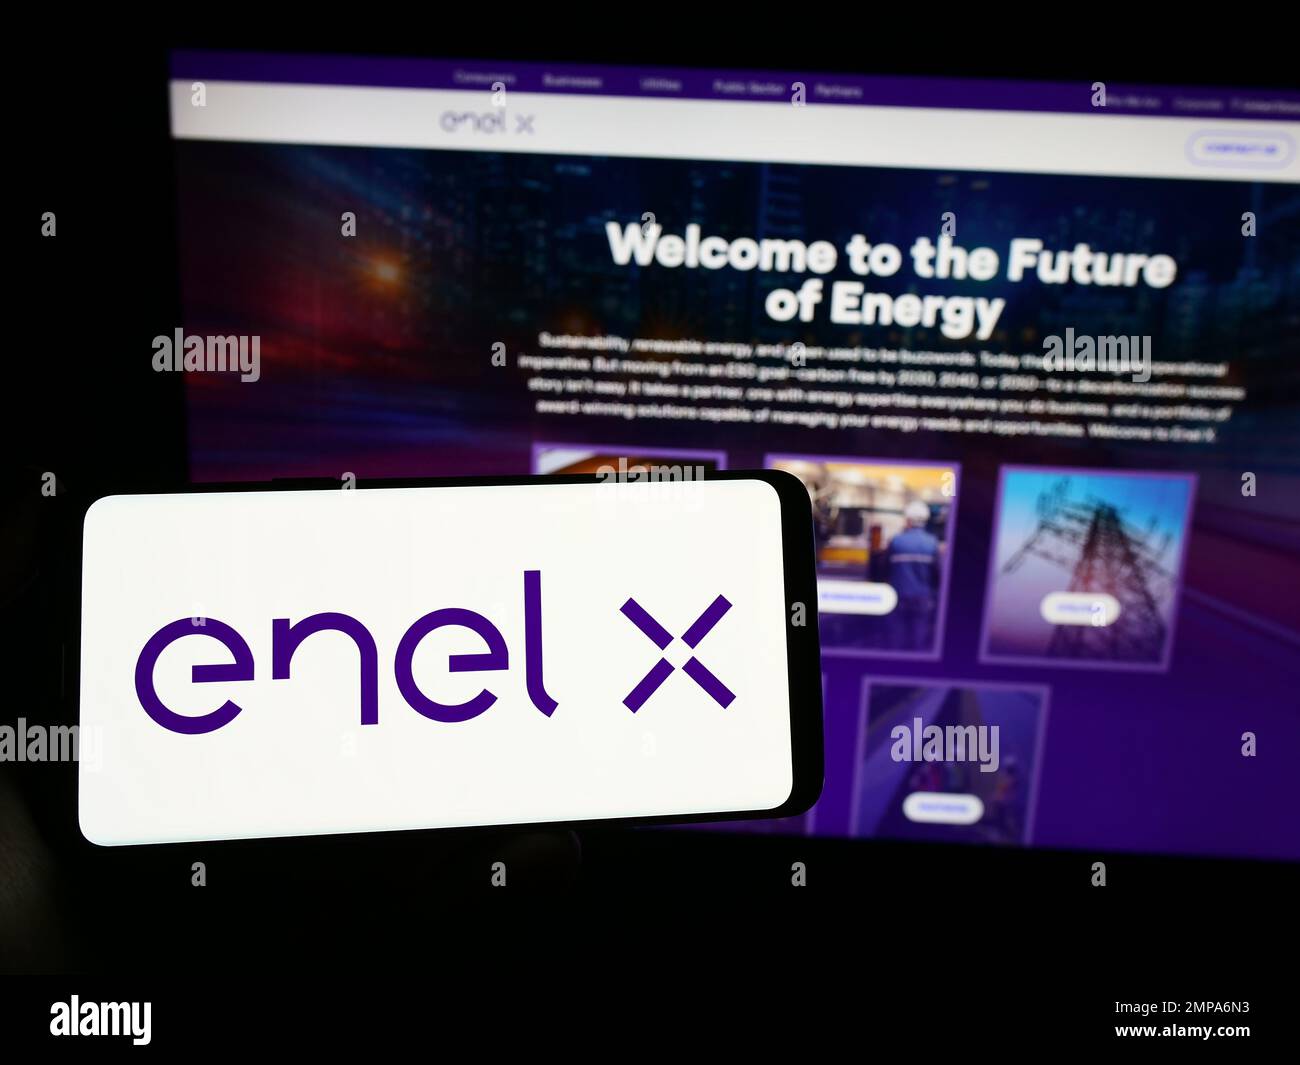 Person holding smartphone with logo of Italian energy company Enel X on screen in front of website. Focus on phone display. Stock Photo